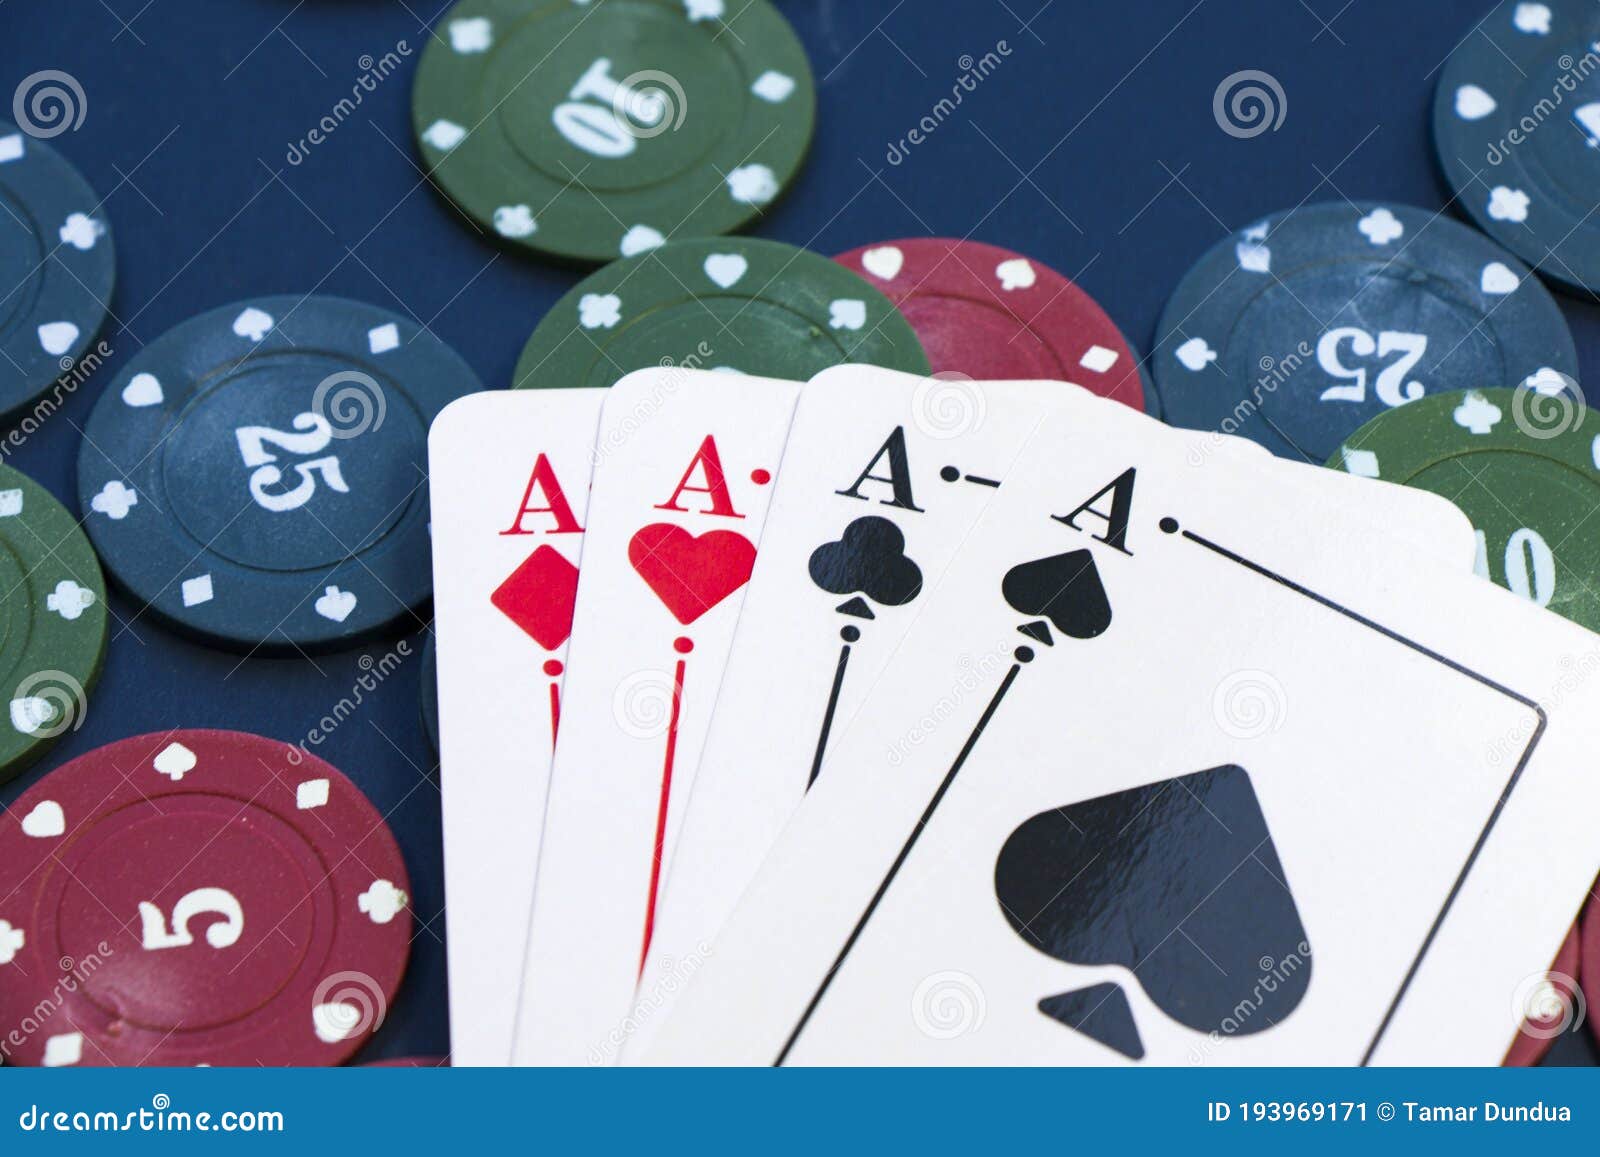 Four Aces And Chips, Card Game, Cards On The Table. Poker ...